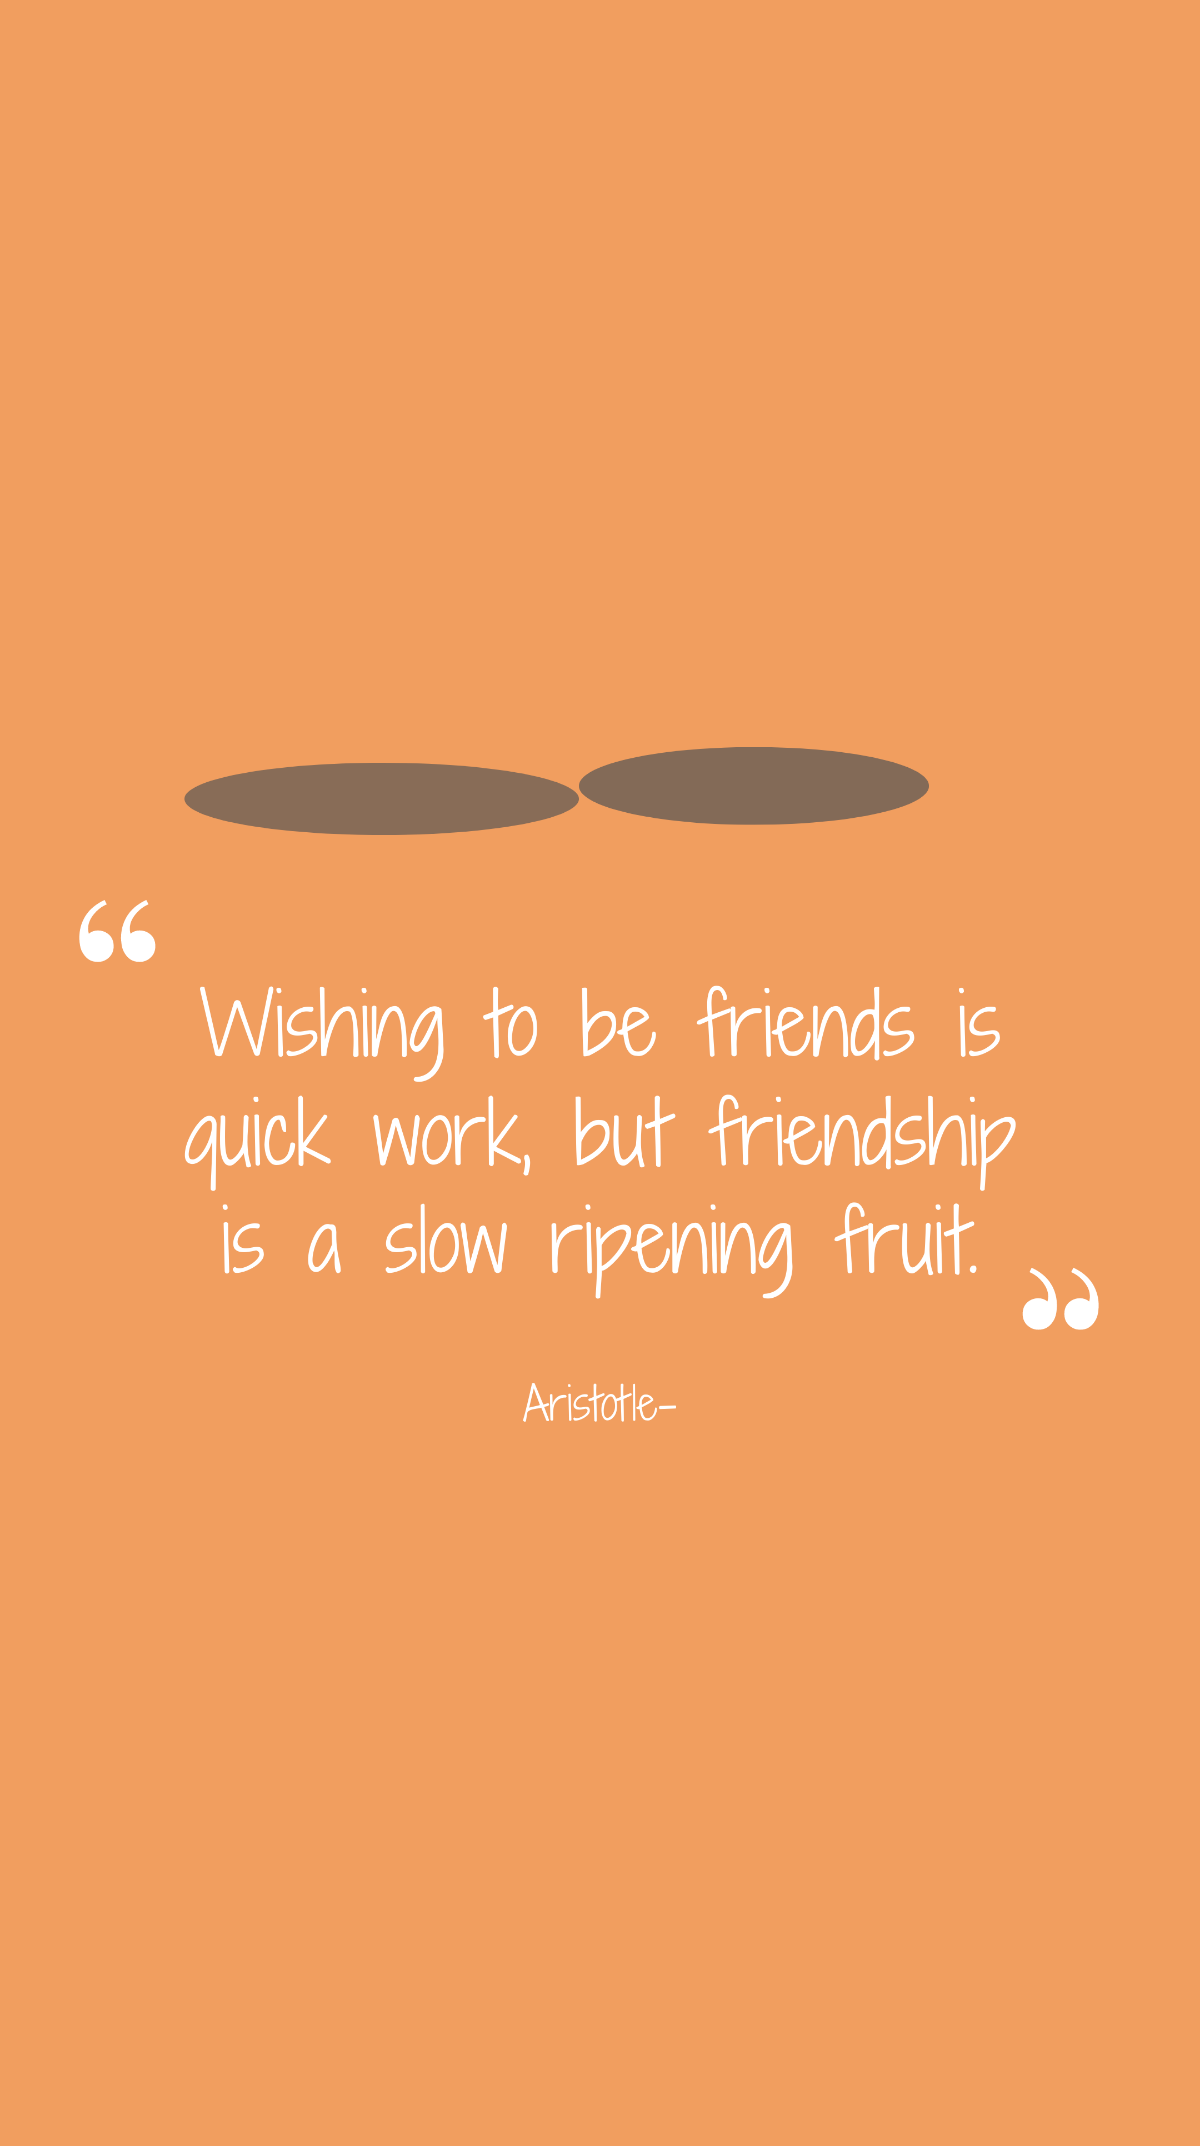 Aristotle- Wishing to be friends is quick work, but friendship is a slow ripening fruit. Template